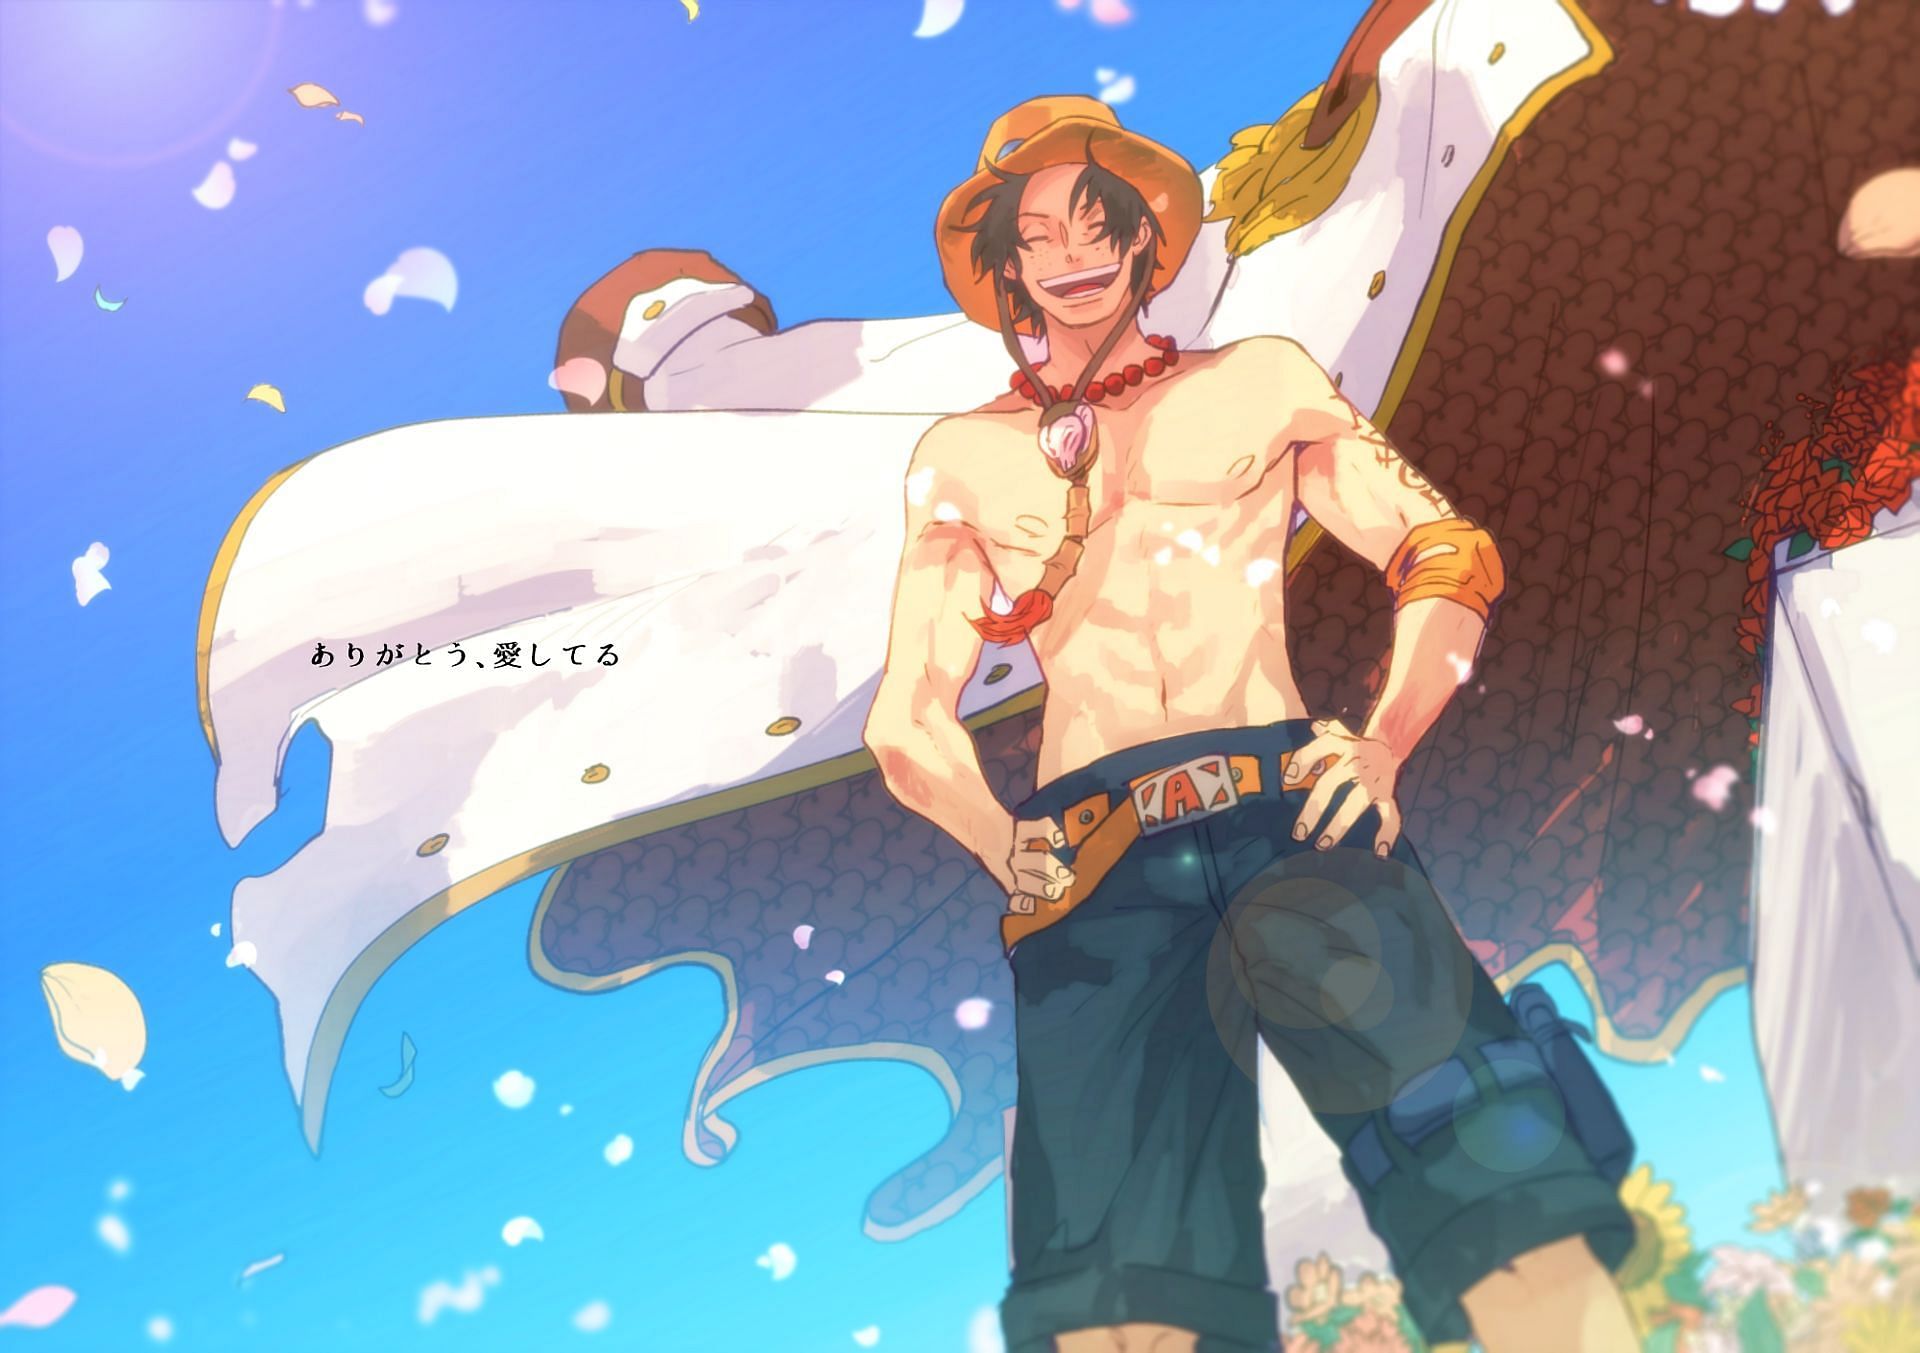 &quot;Fire-Fist&quot; Ace from One Piece (Image via wall.alphacoders.com)